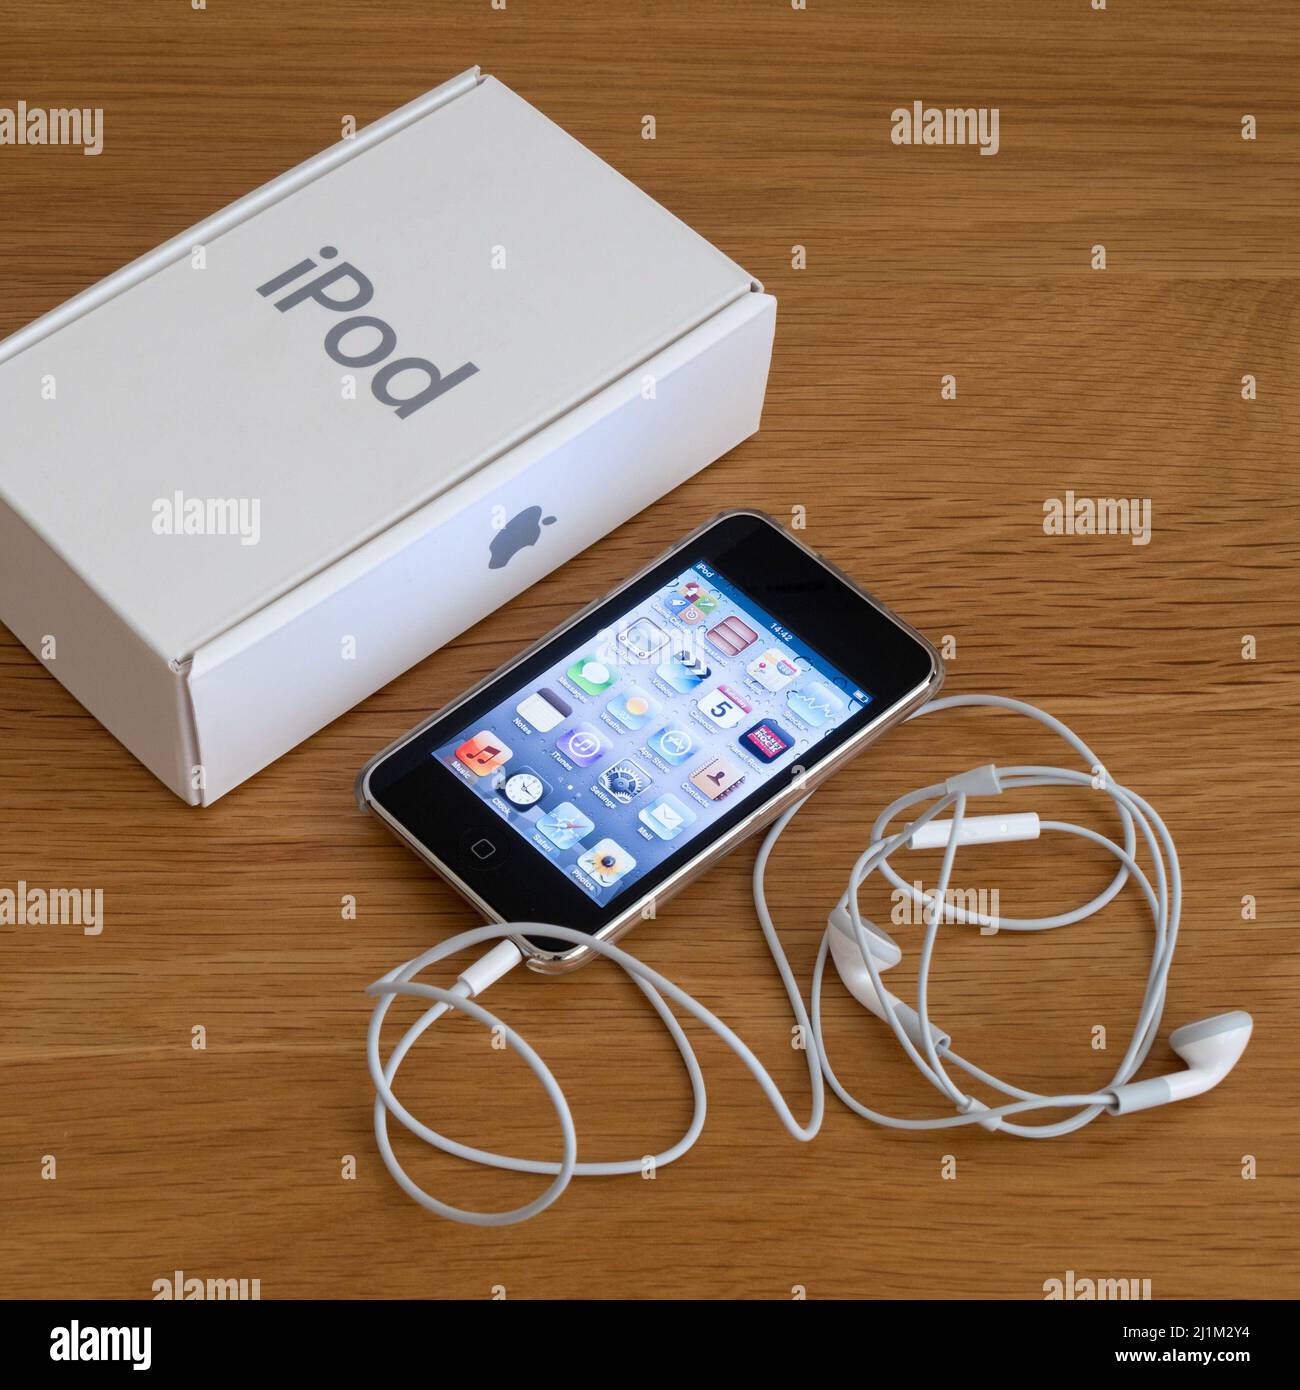 STOCK PHOTOGRAPH - Apple iPod touch (3rd generation) portable MP3 music player on wooden desk surface with box and headphones Stock Photo